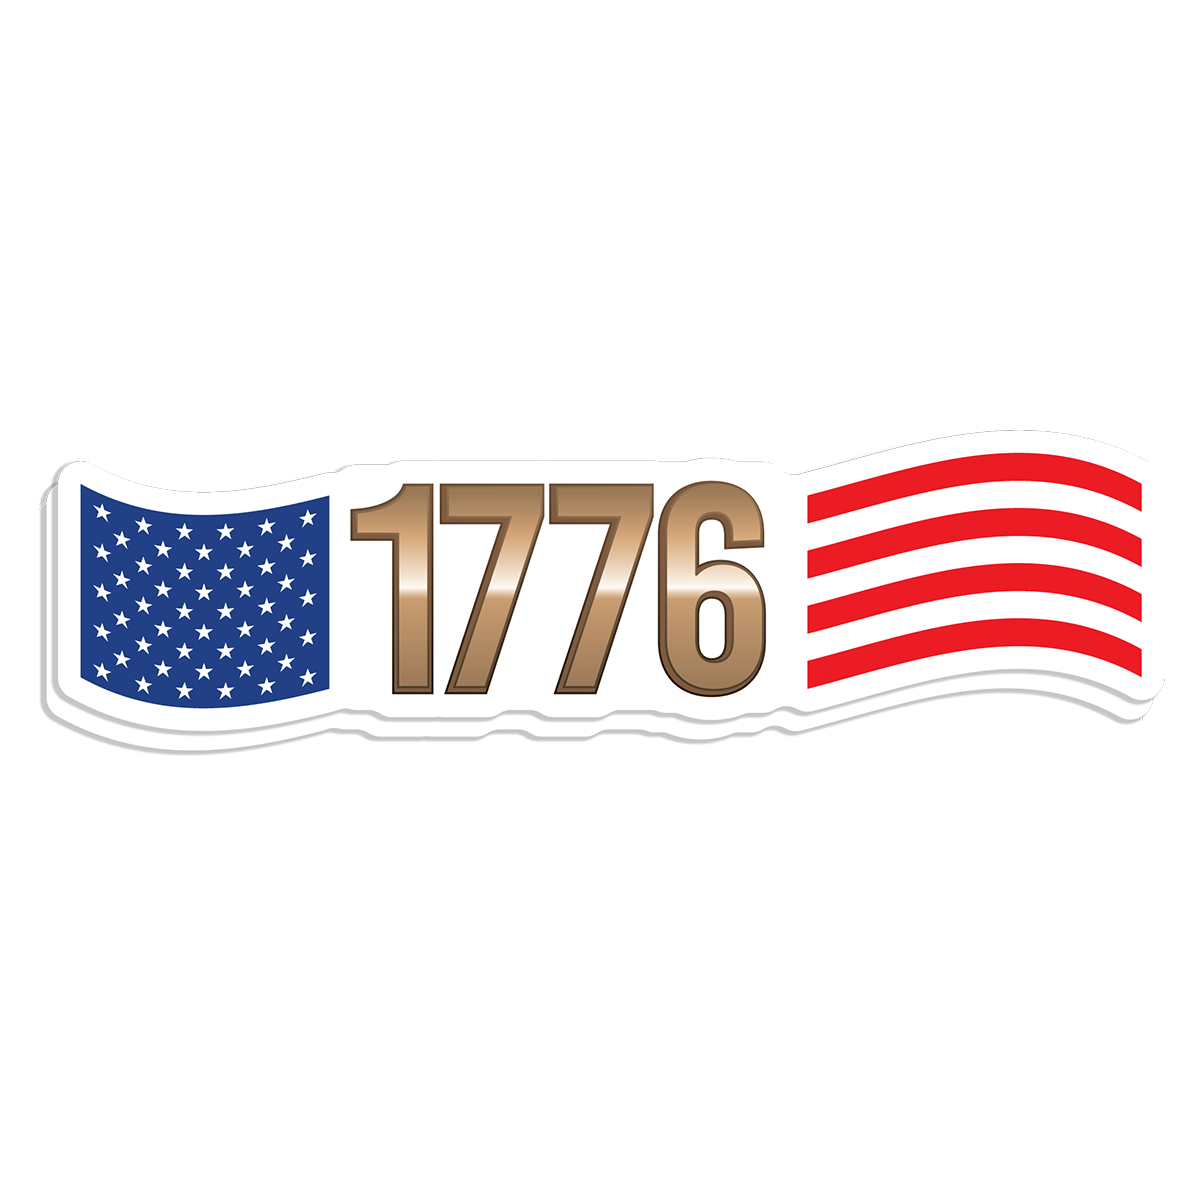 "1776" - Decal